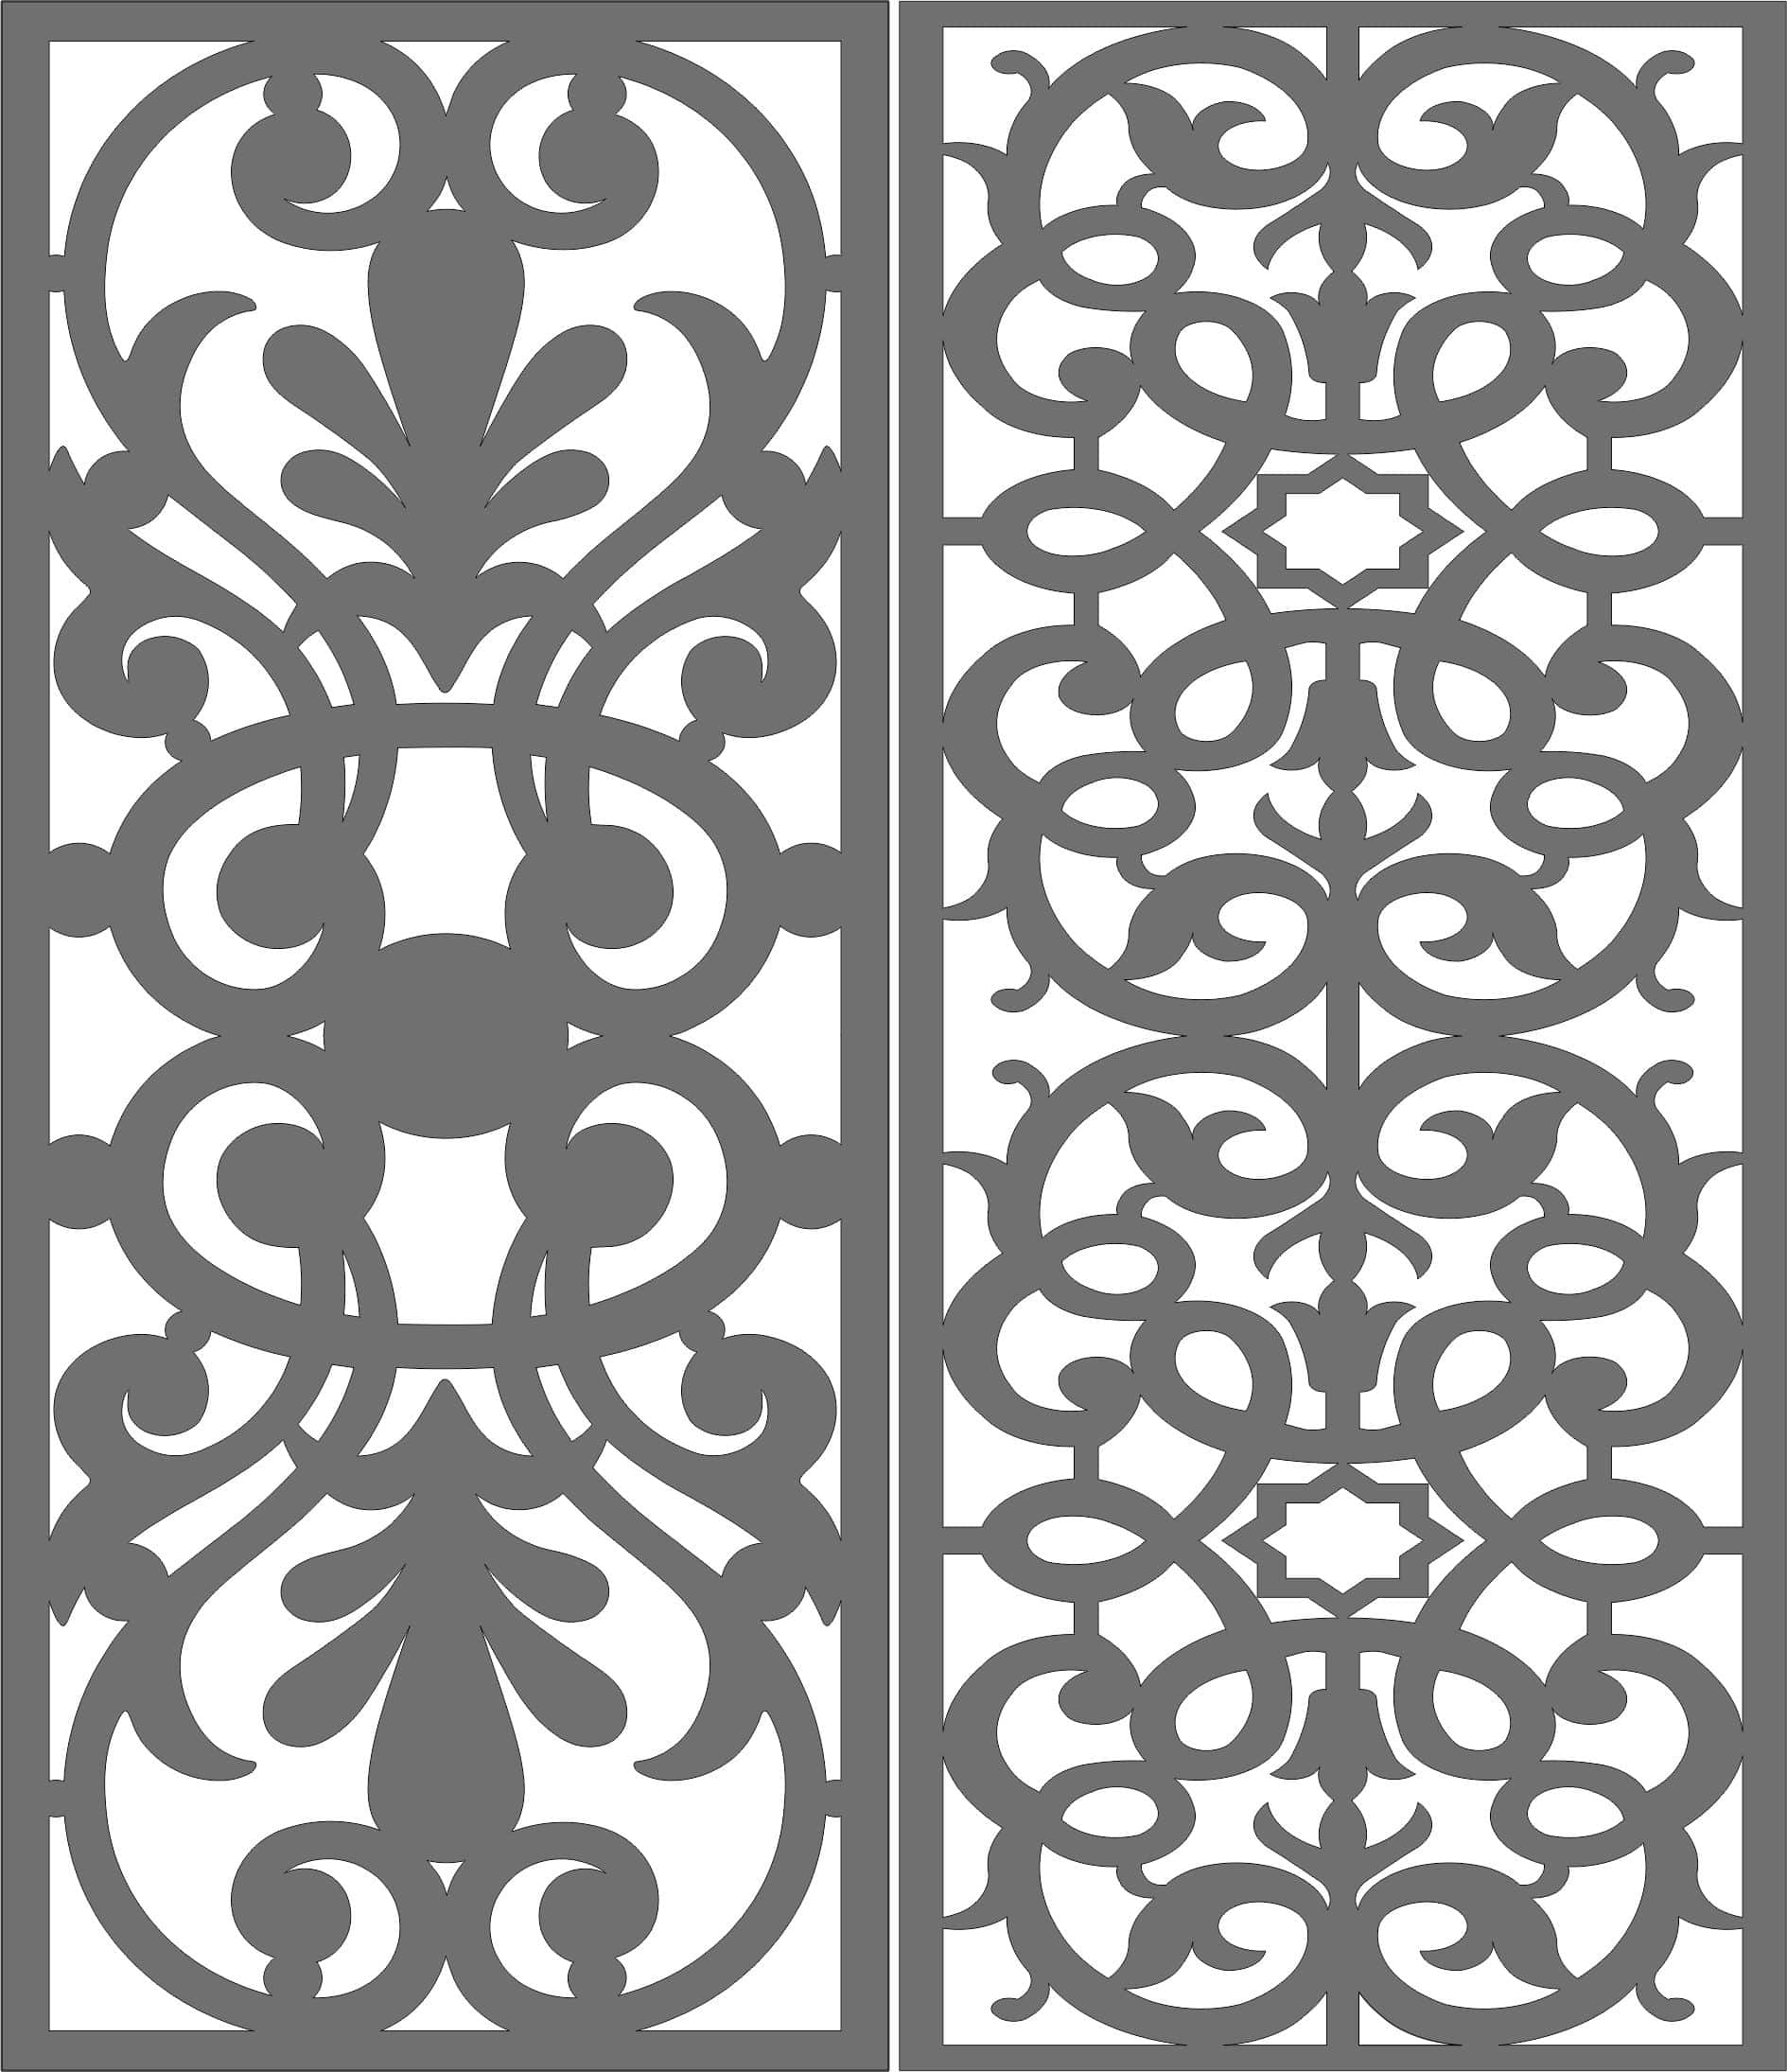 Decorative Privacy Partition Indoor Panel Room Divider Pattern Free Vector